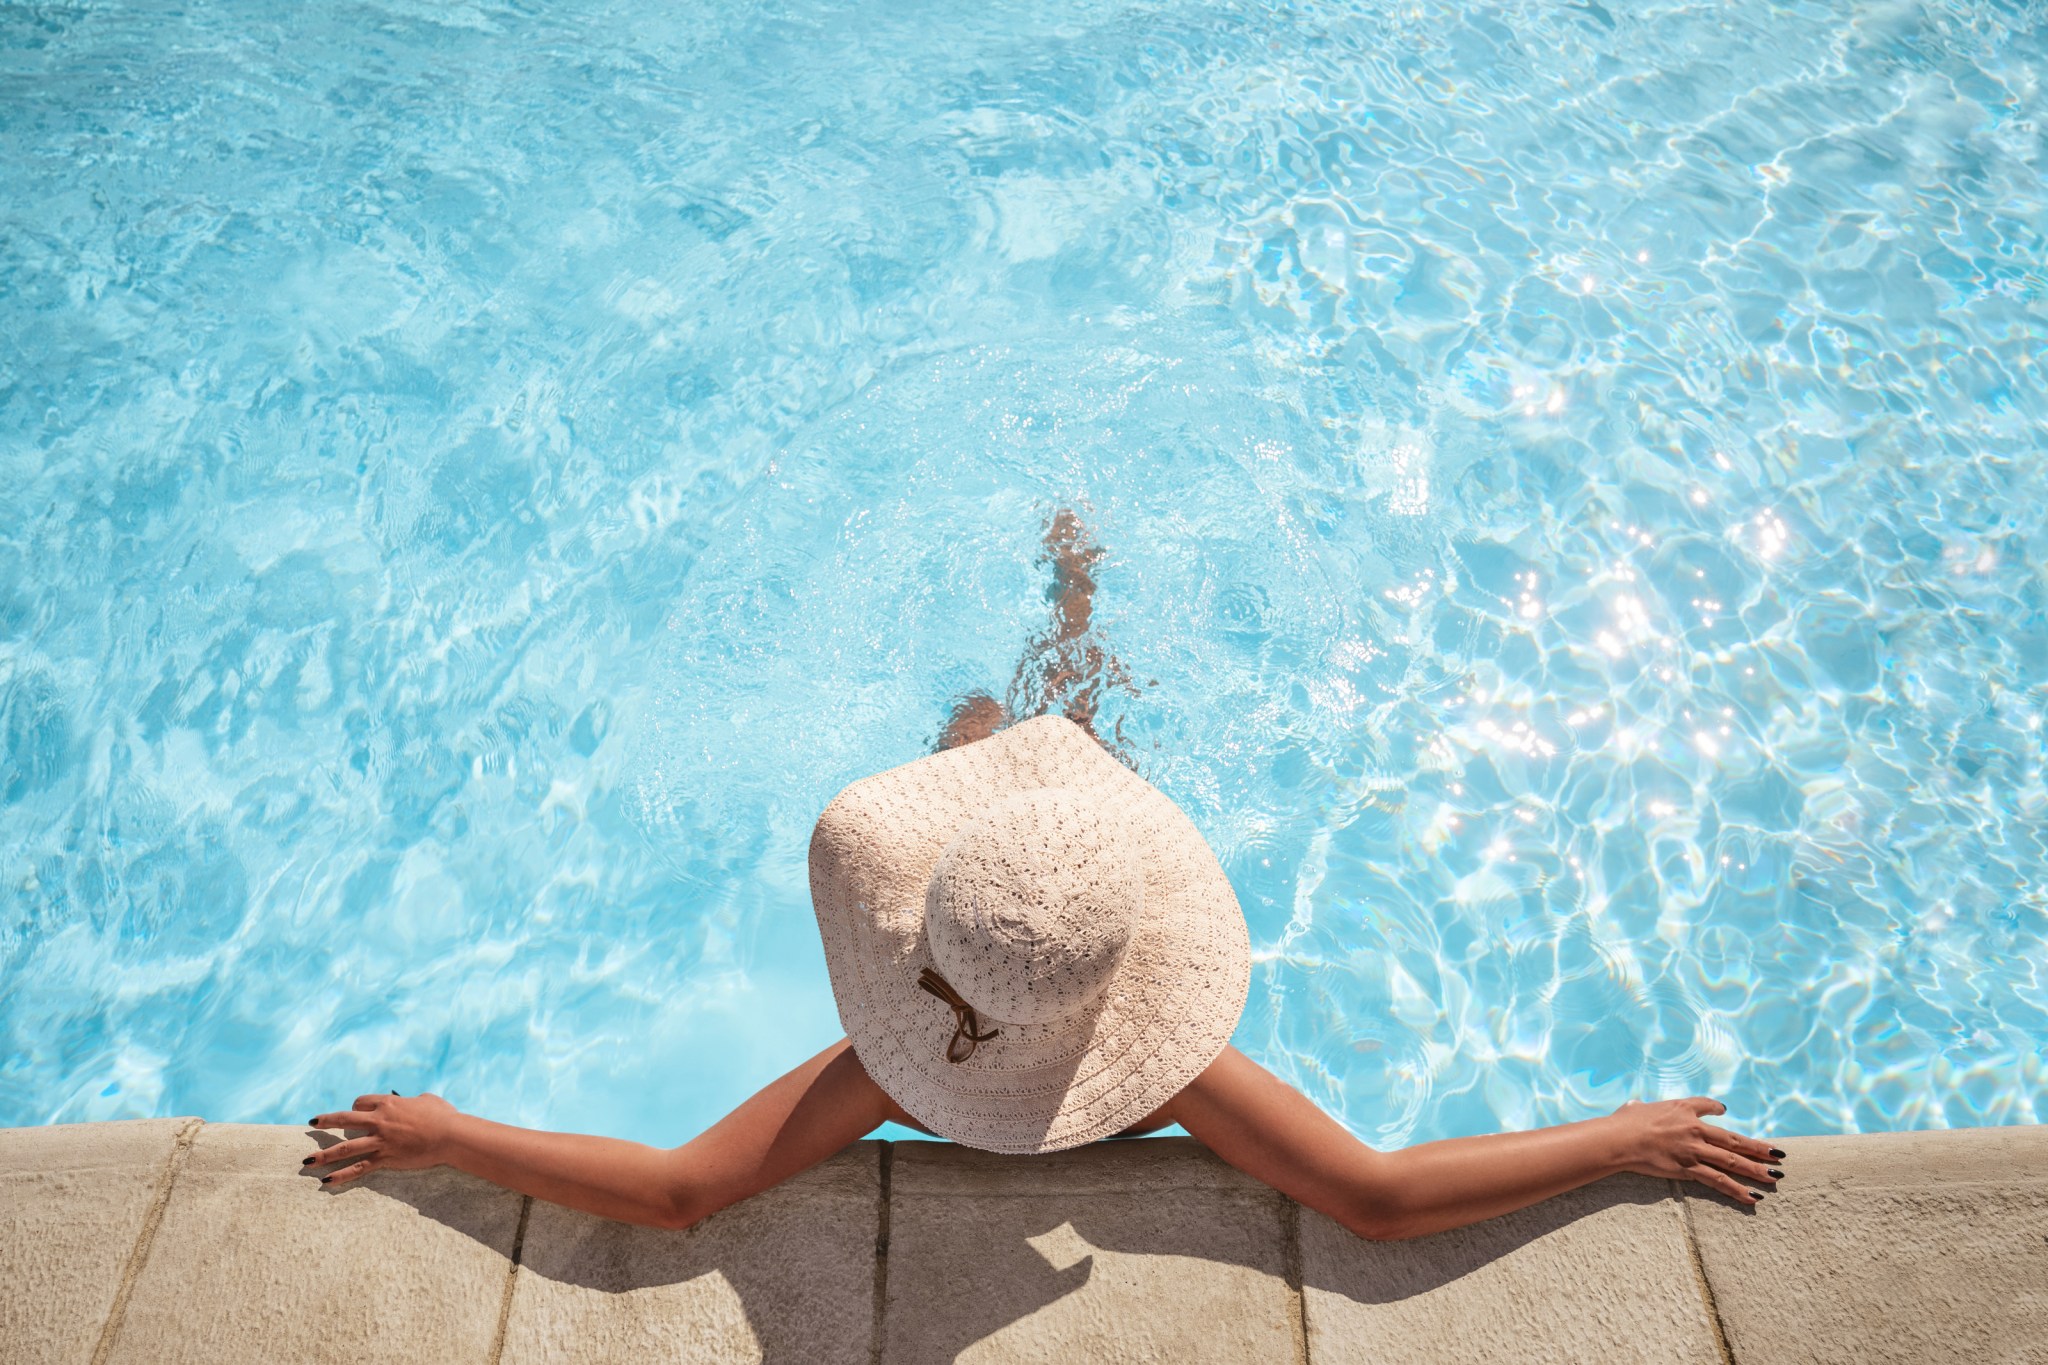 young woman wearing a hat relaxing in a clear saltwater swimming pool